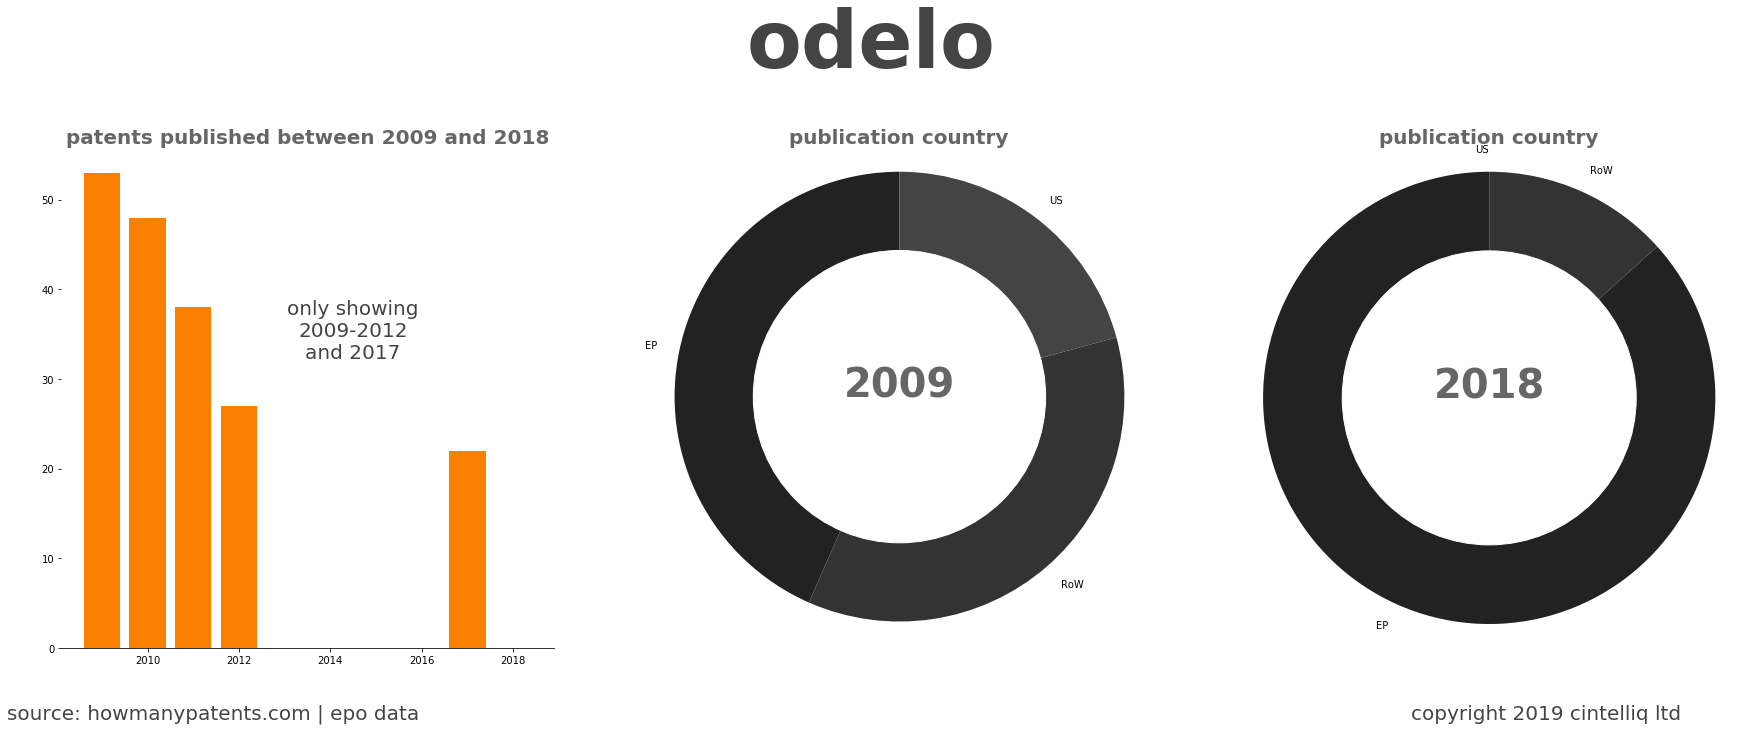 summary of patents for Odelo